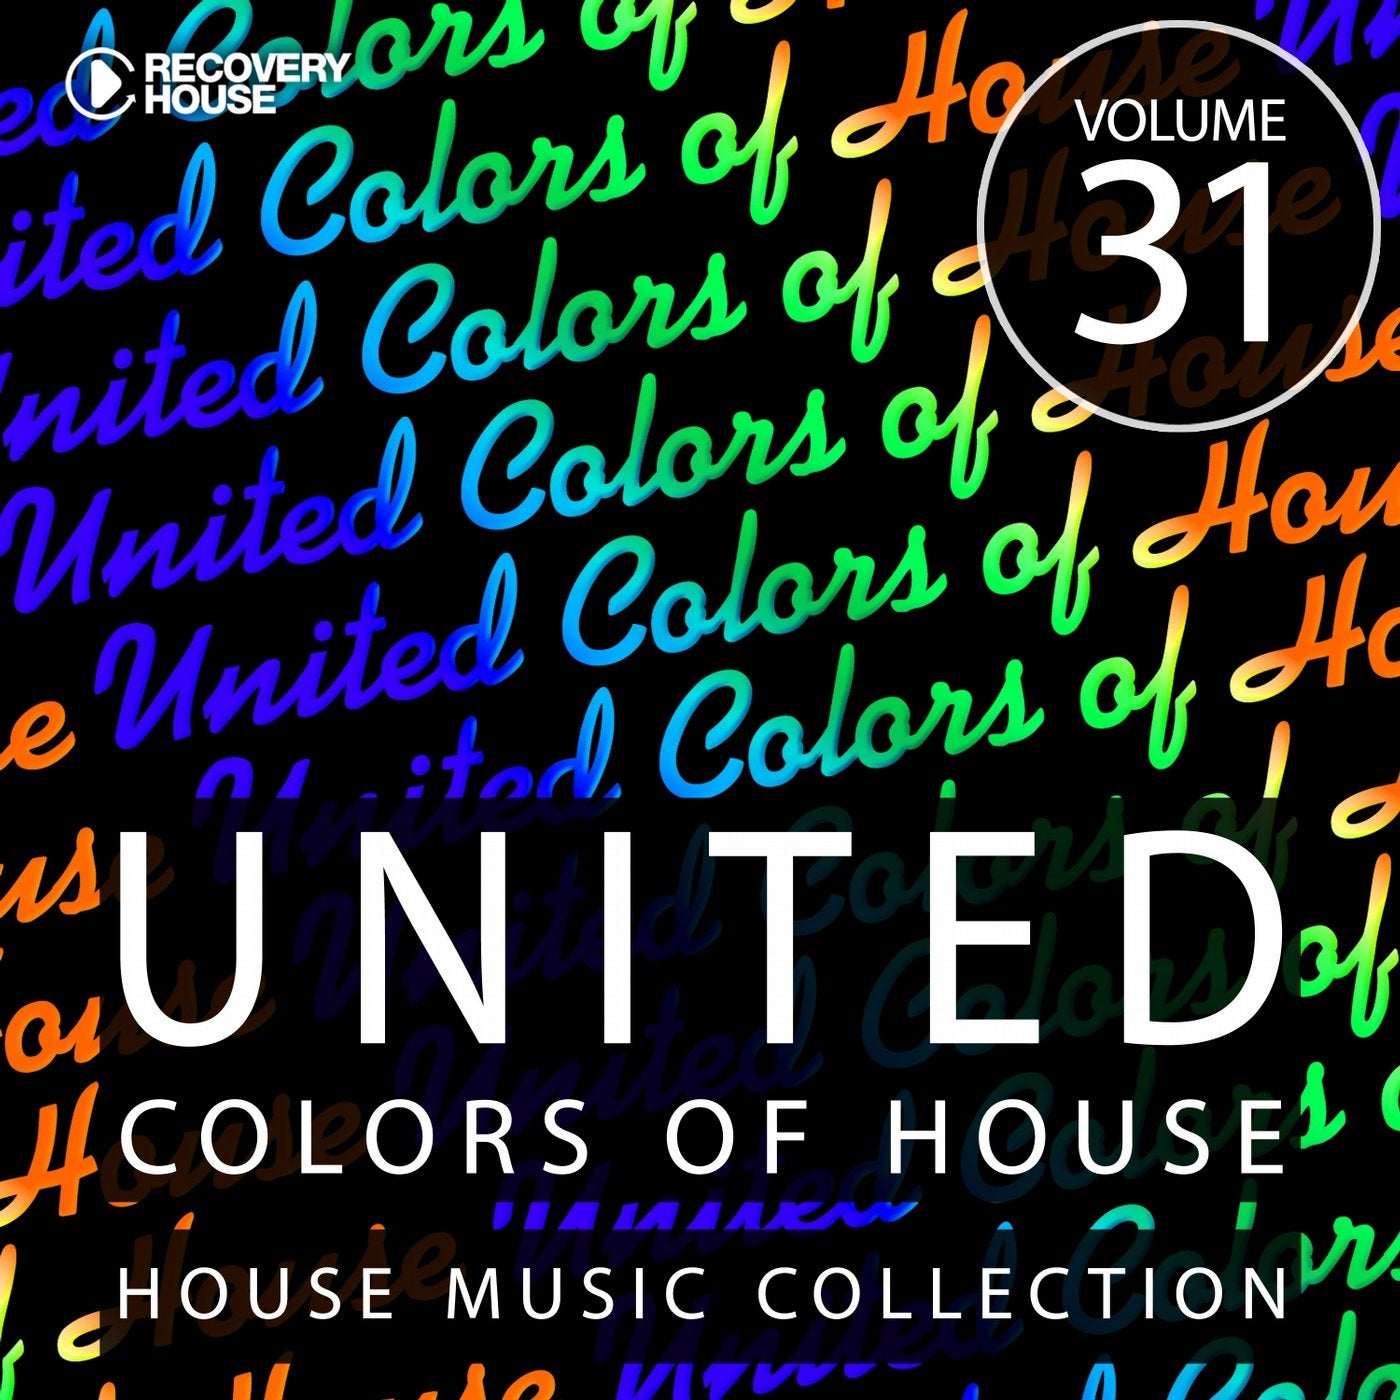 United Colors Of House Volume 31